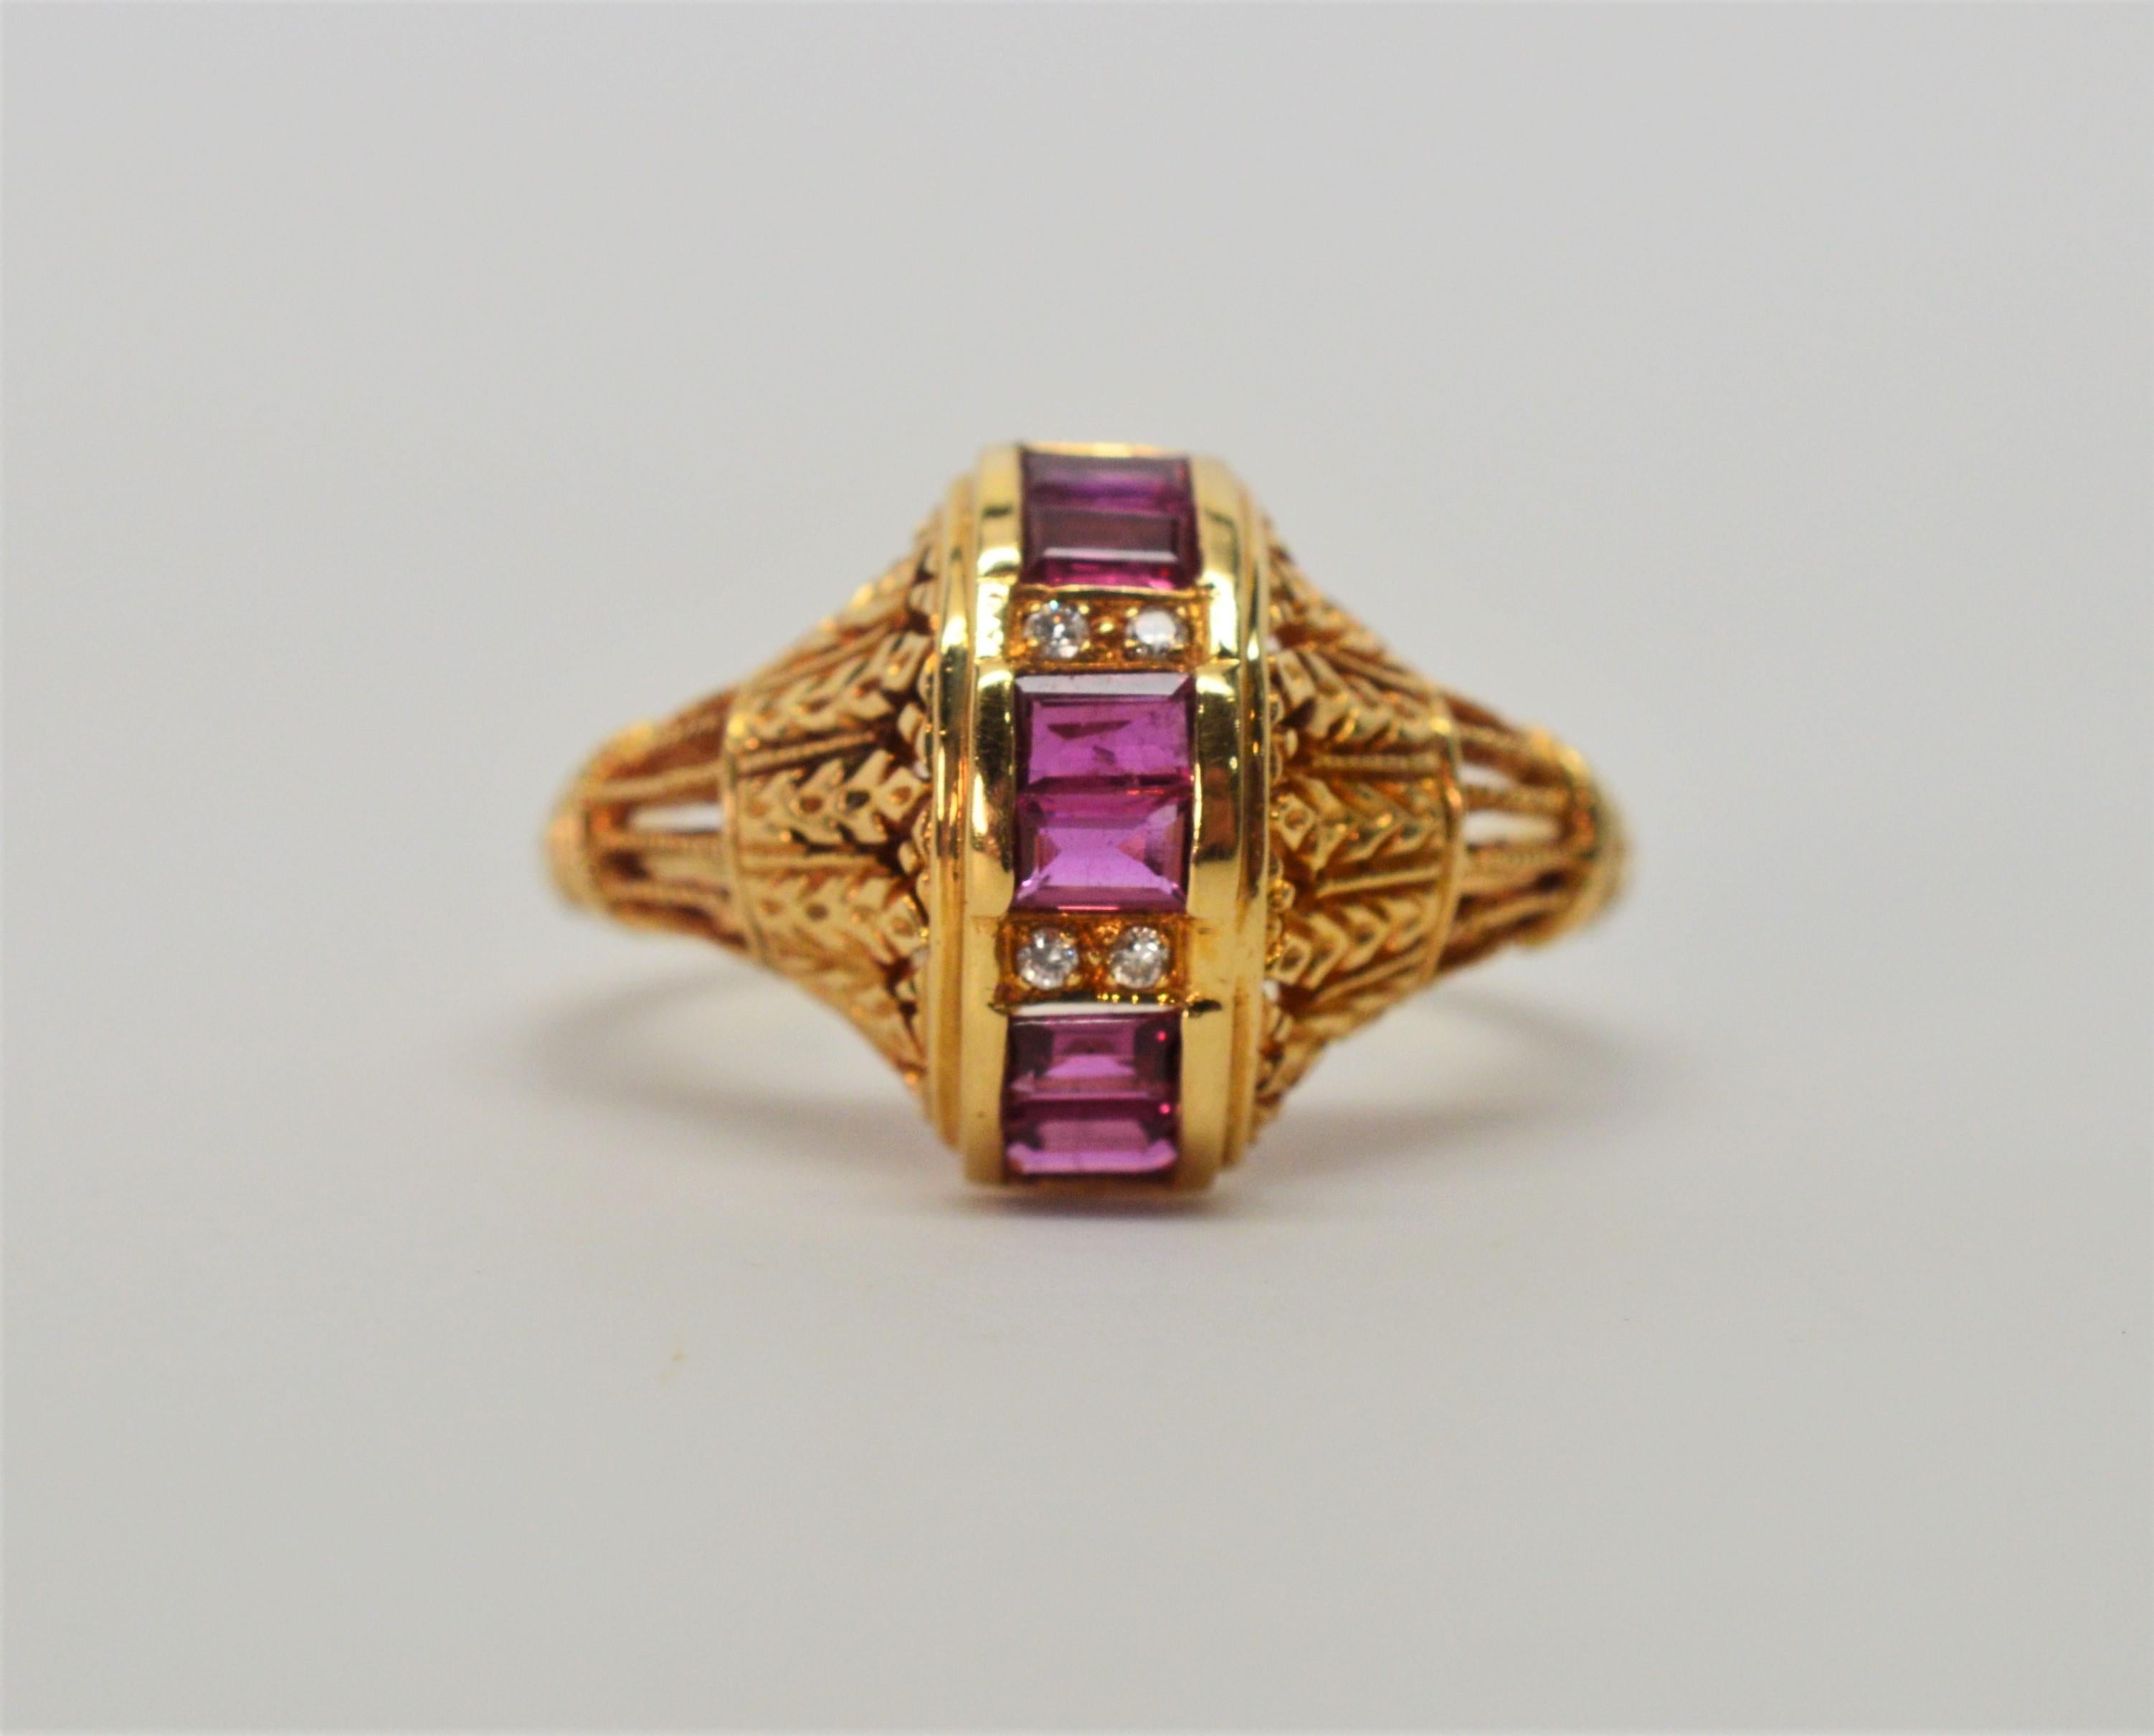 Eighteen carat yellow gold with ornate filigree create this elegant band leading to the ring center generously inset with a vertical band of six gem quality emerald-cut rubies, approximately .30 carats total weight , which are delicately adorned